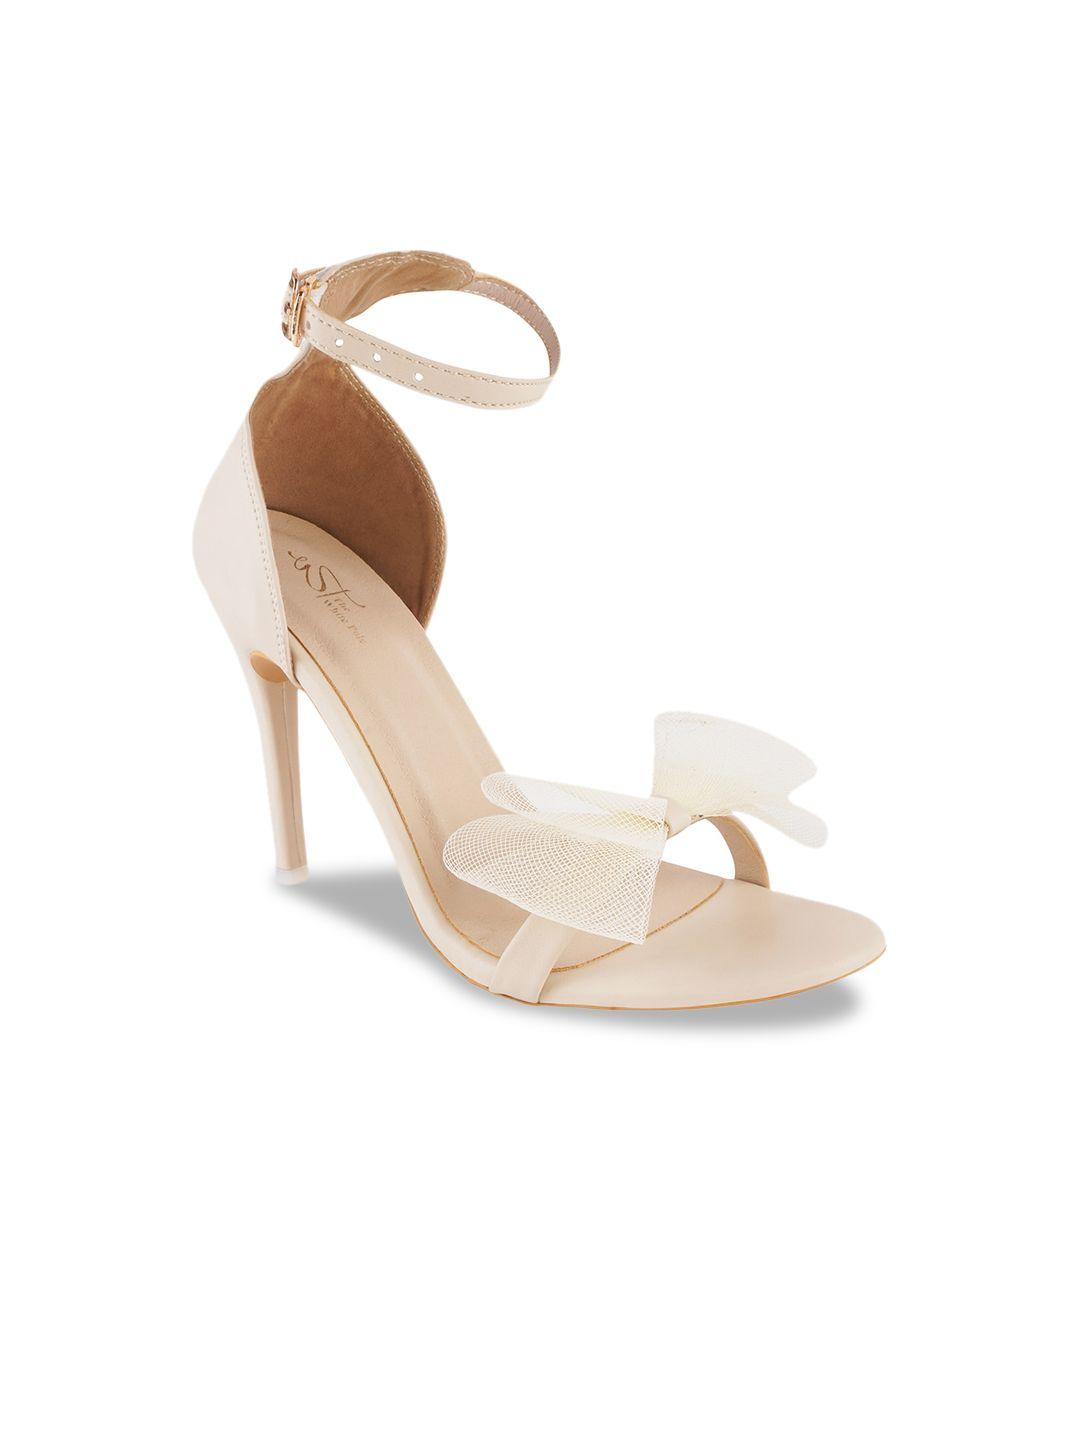 the-white-pole-open-toe-stiletto-heels-with-bows-&-ankle-loop